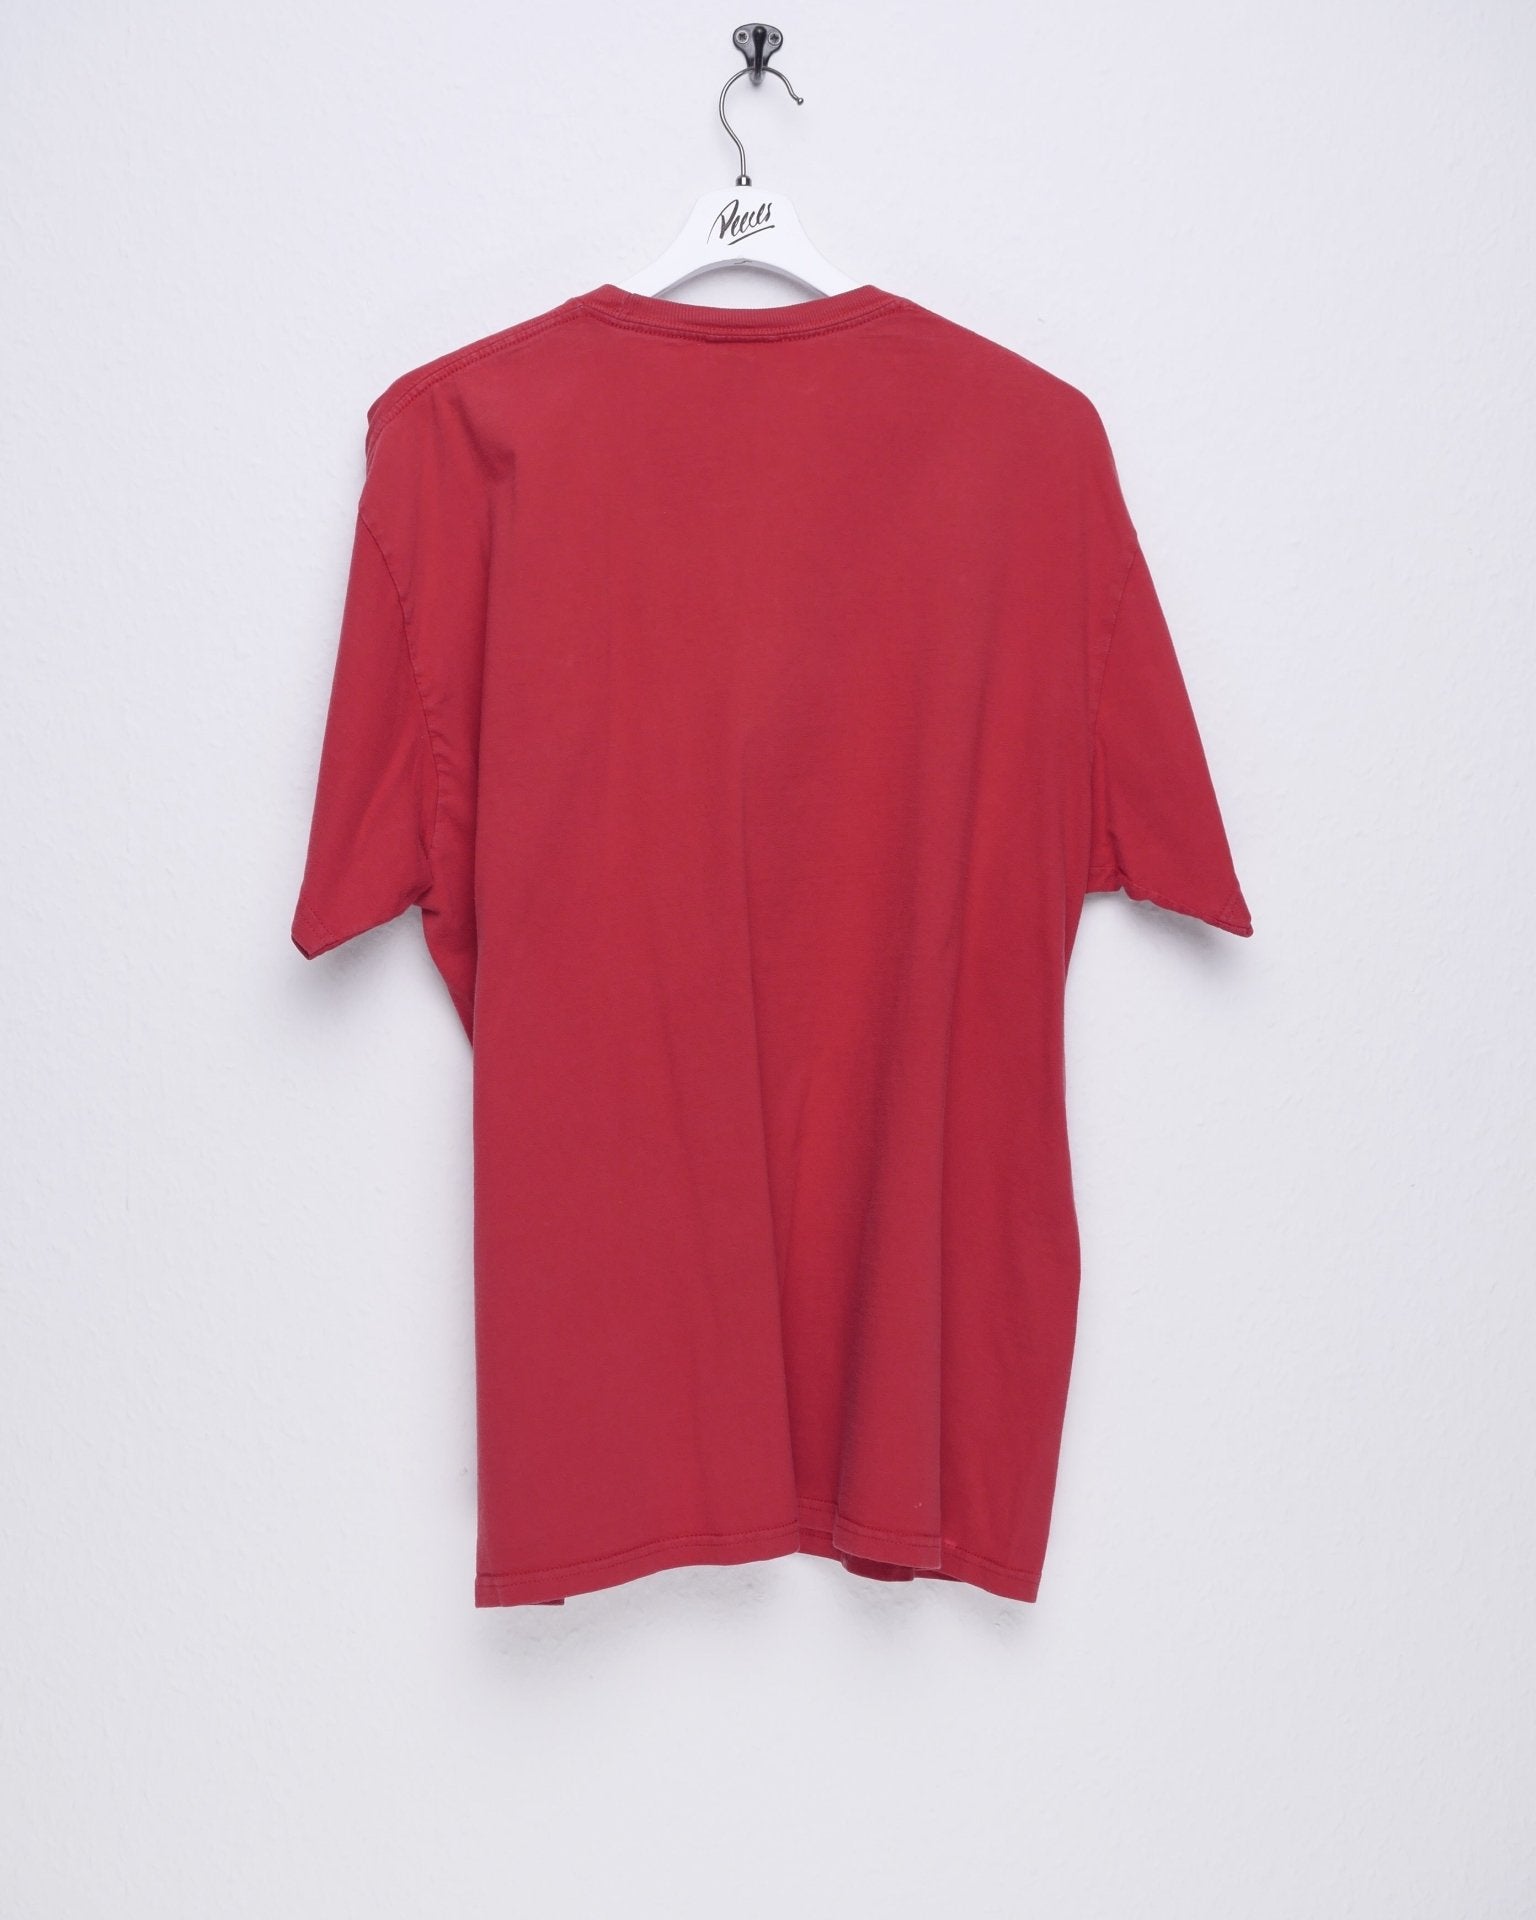 nike embroidered Swoosh red Shirt - Peeces